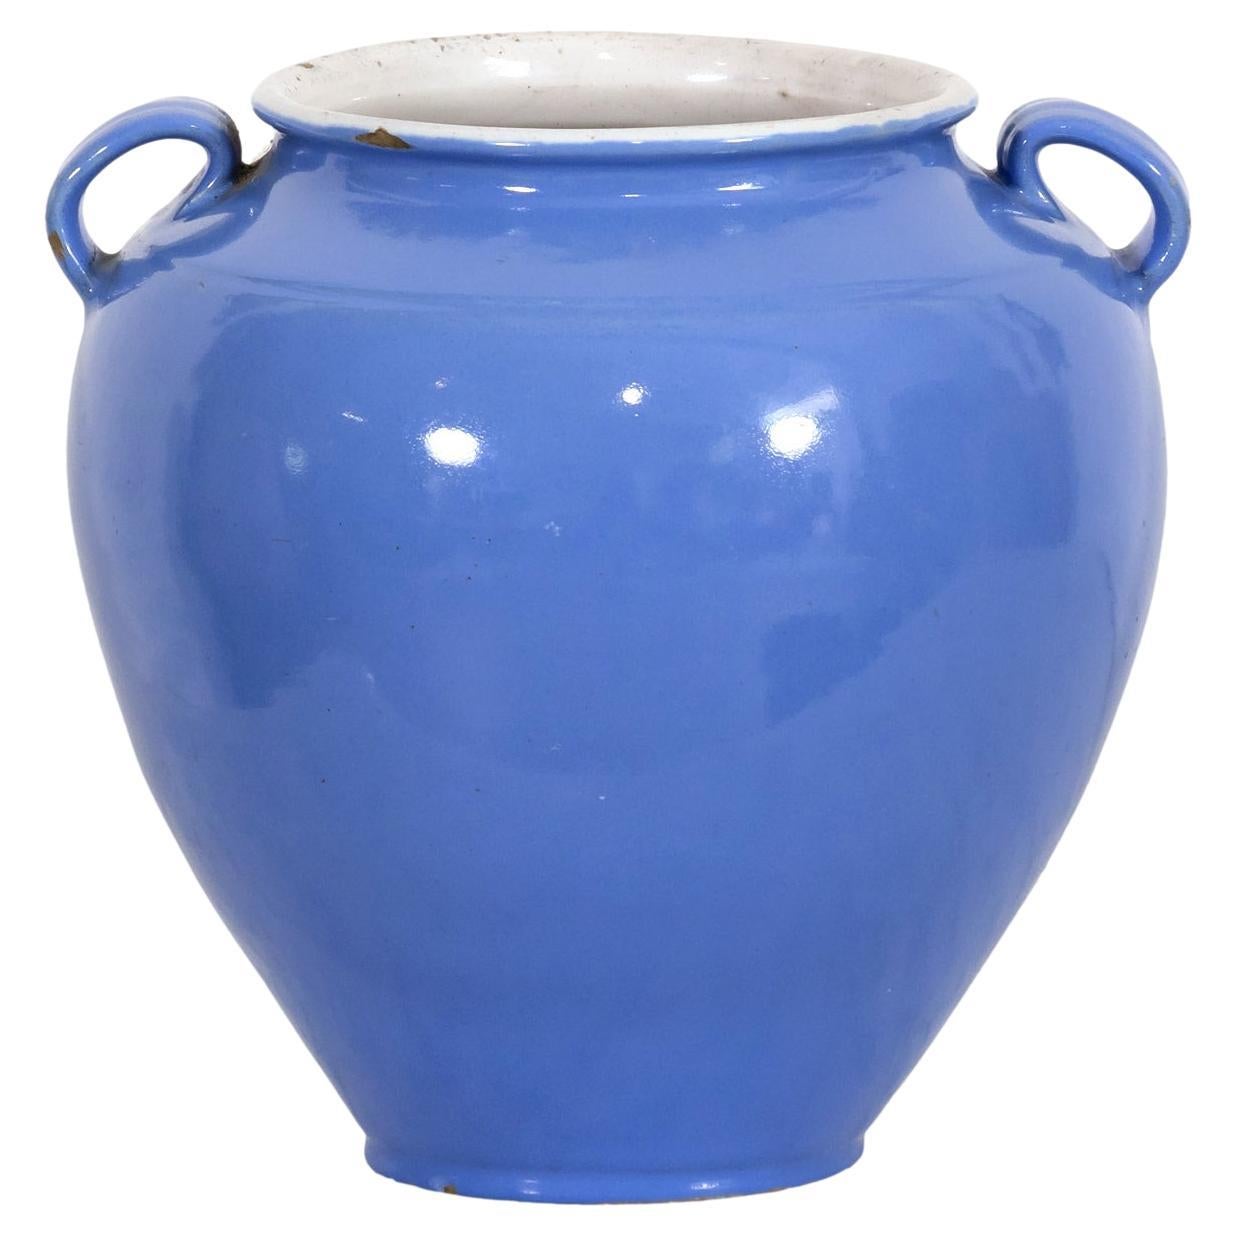 Rare 19th Century French Confit Pot or Egg Pot with Blue Glaze